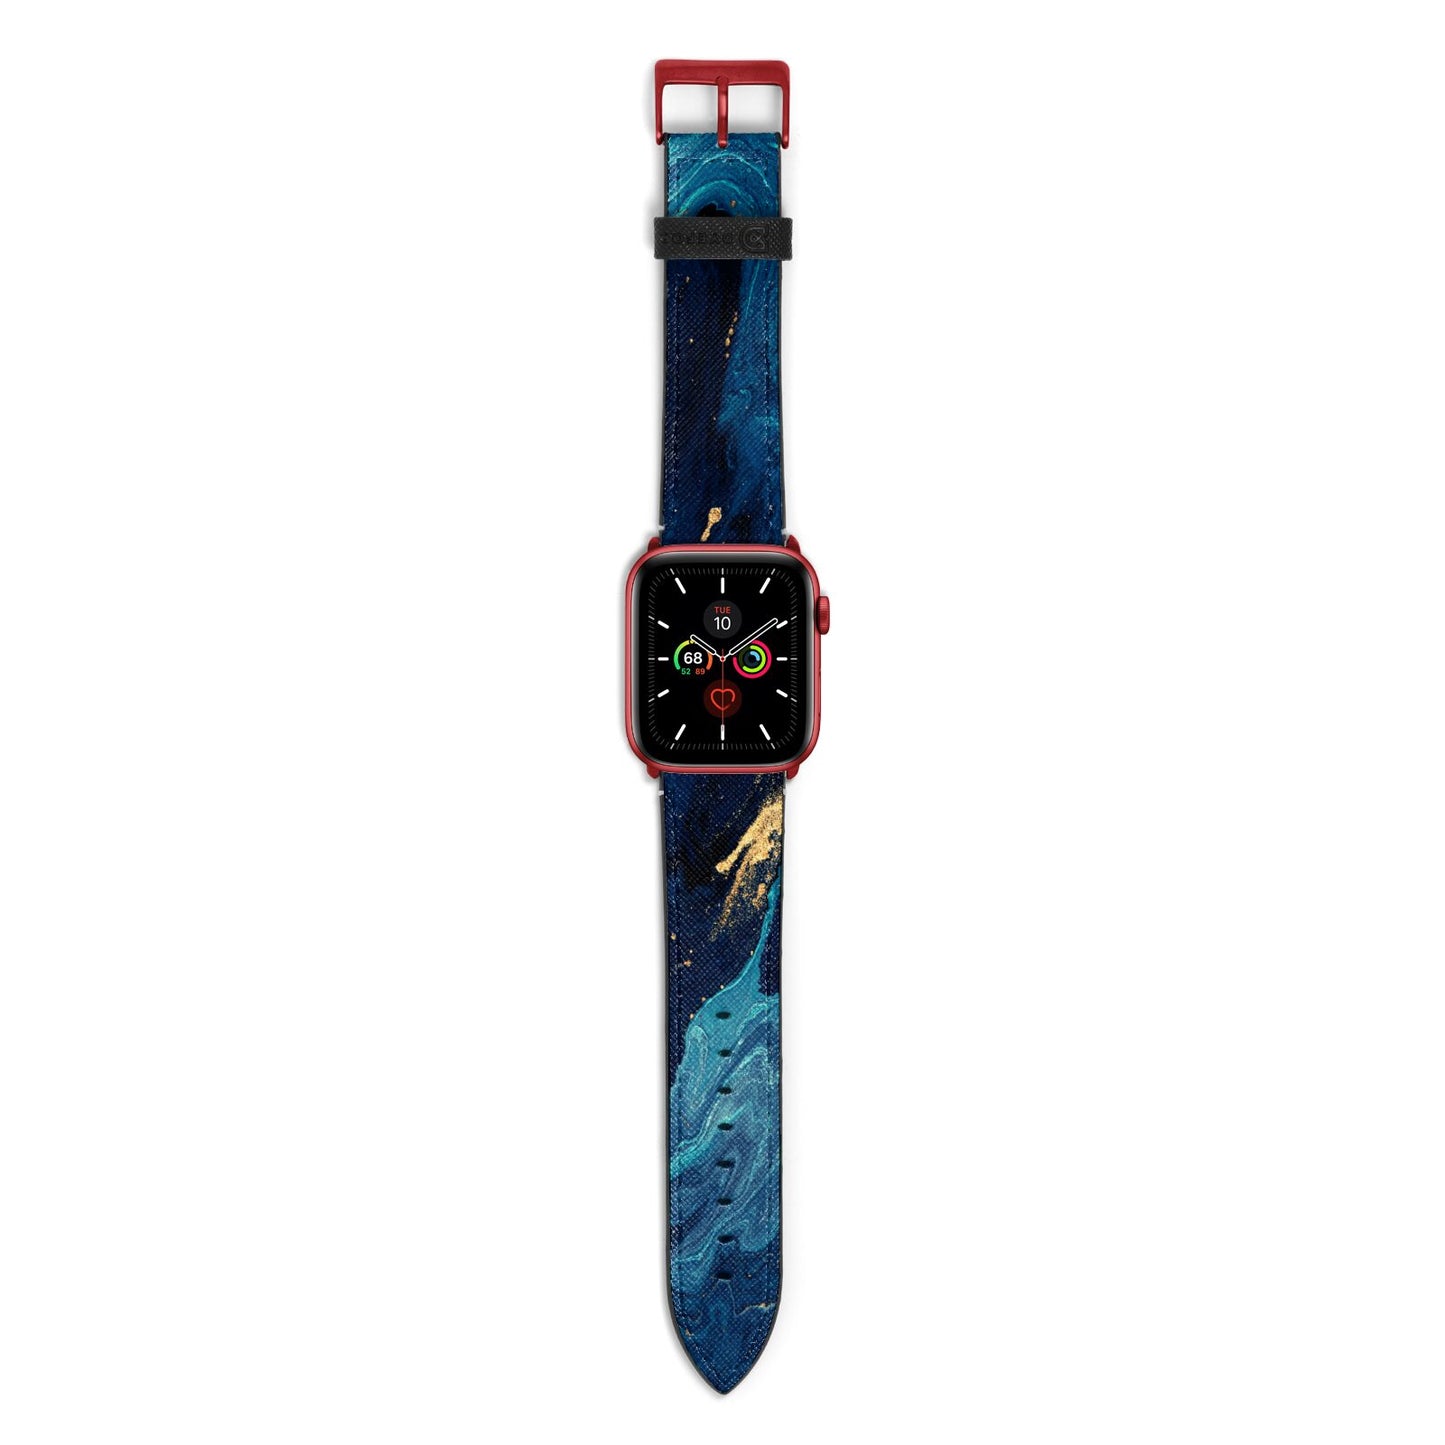 Blue Lagoon Marble Apple Watch Strap with Red Hardware